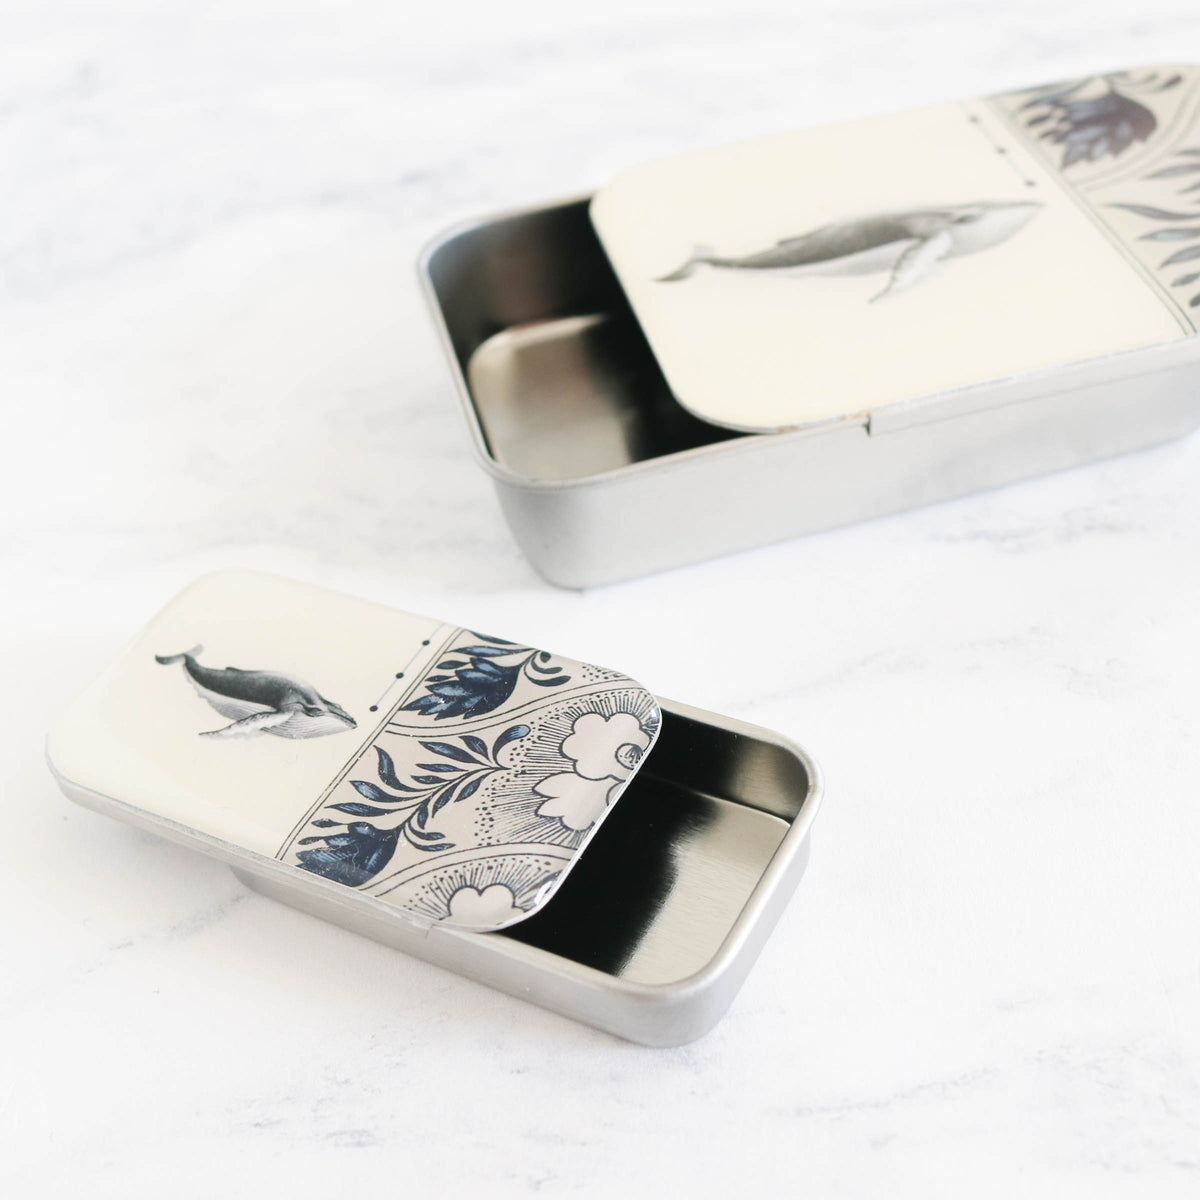 Vintage-Inspired Storage and Notions Tins - Whale